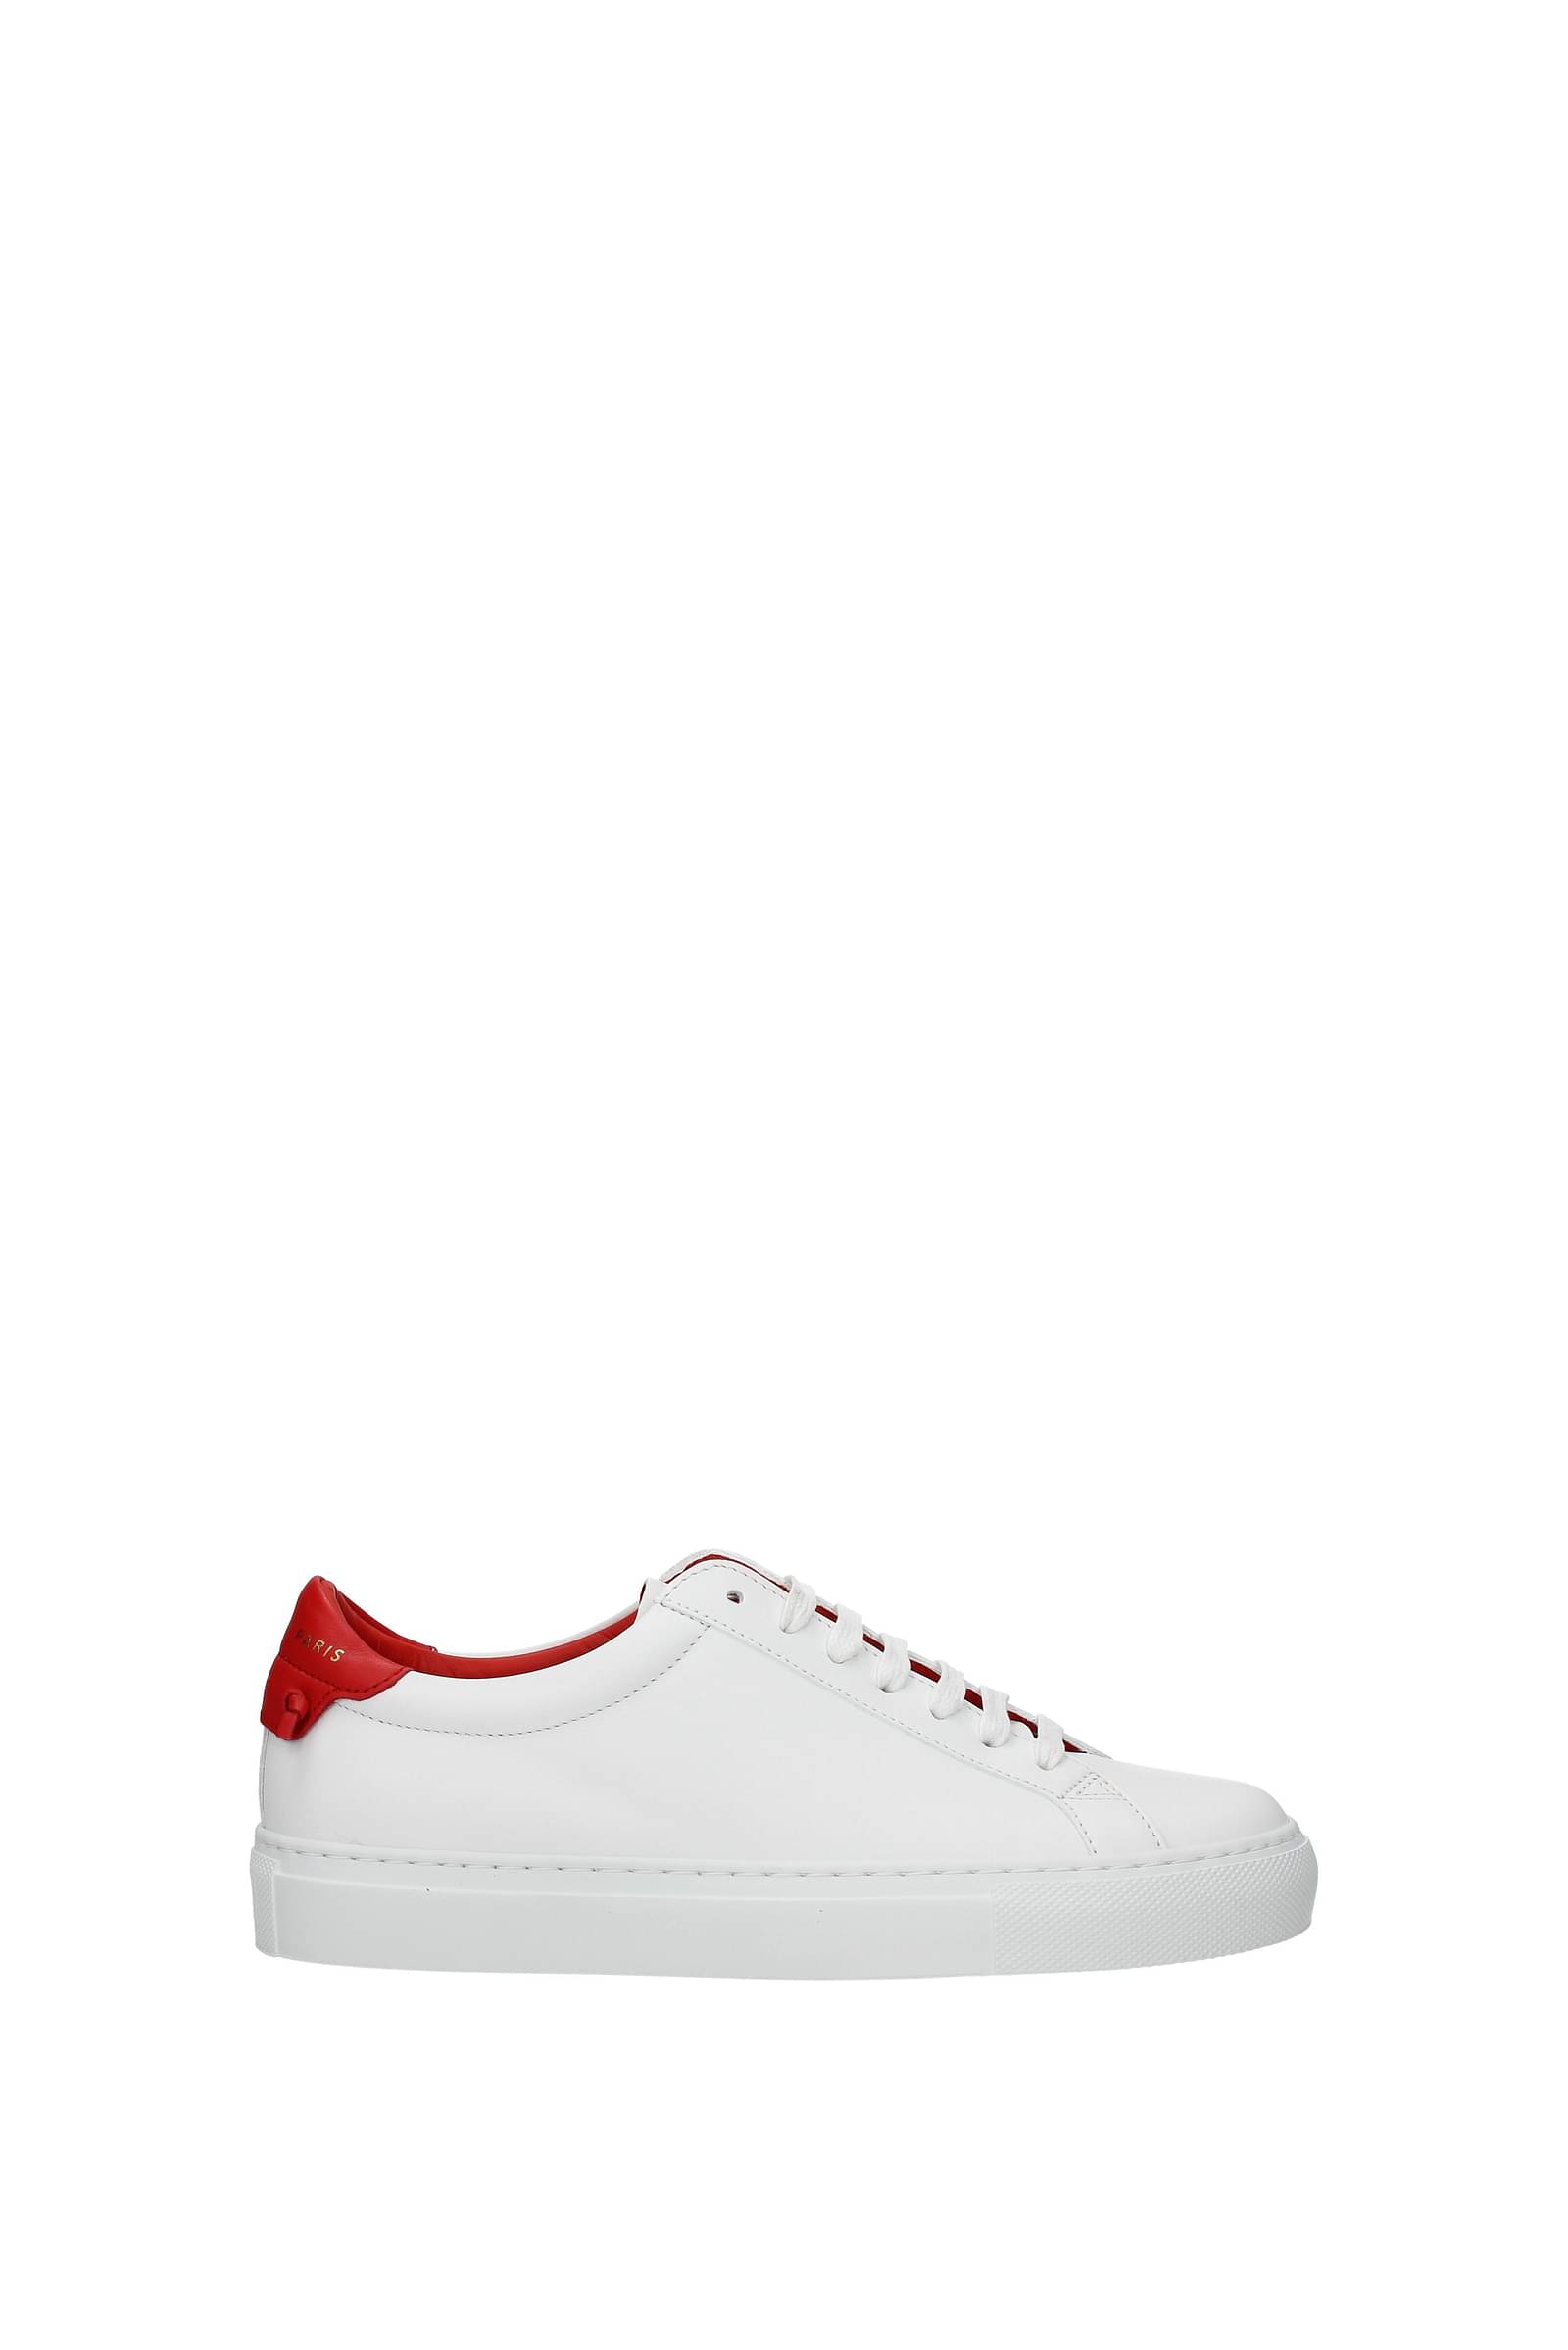 Givenchy Men's City Sport Pumpkin Lace Up Sneakers | Bloomingdale's